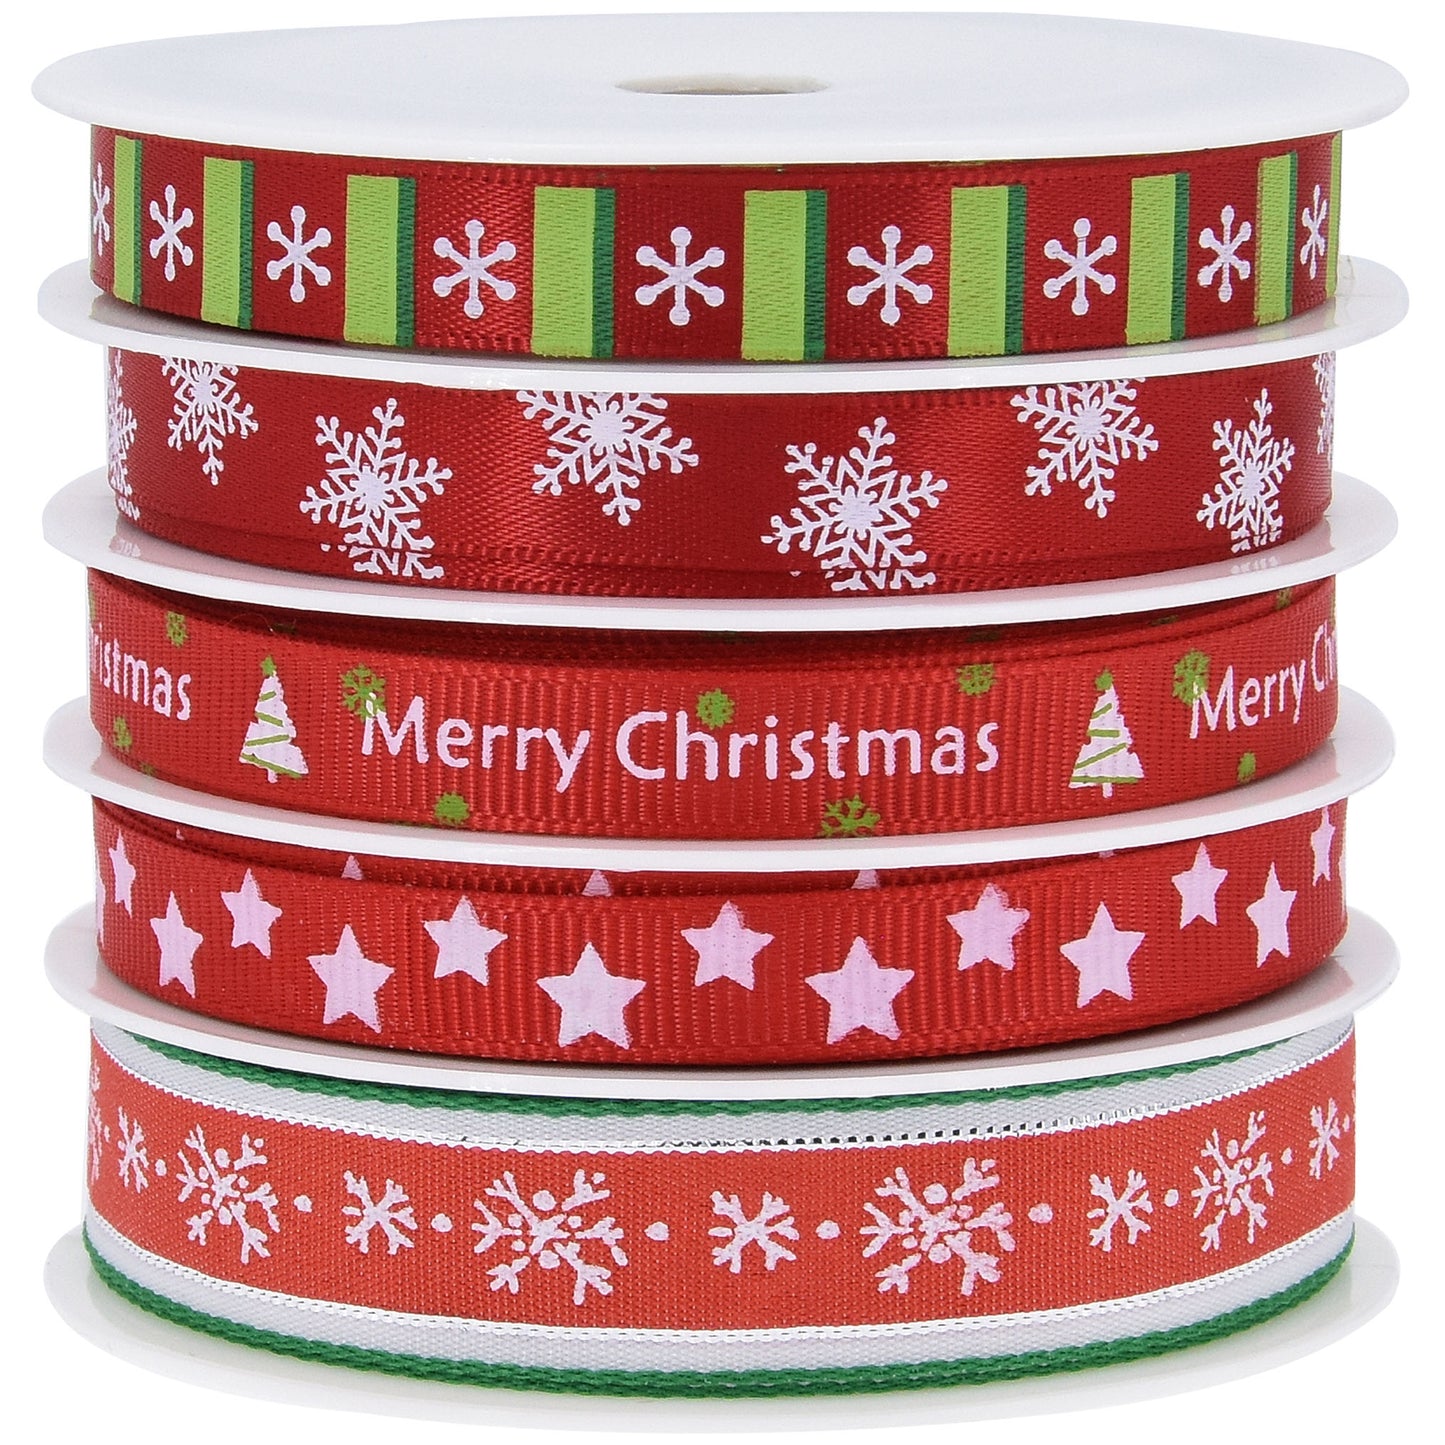 Fowod Christmas Ribbon best for Gift Wraping, Christmas Celebration Decoration (Red)